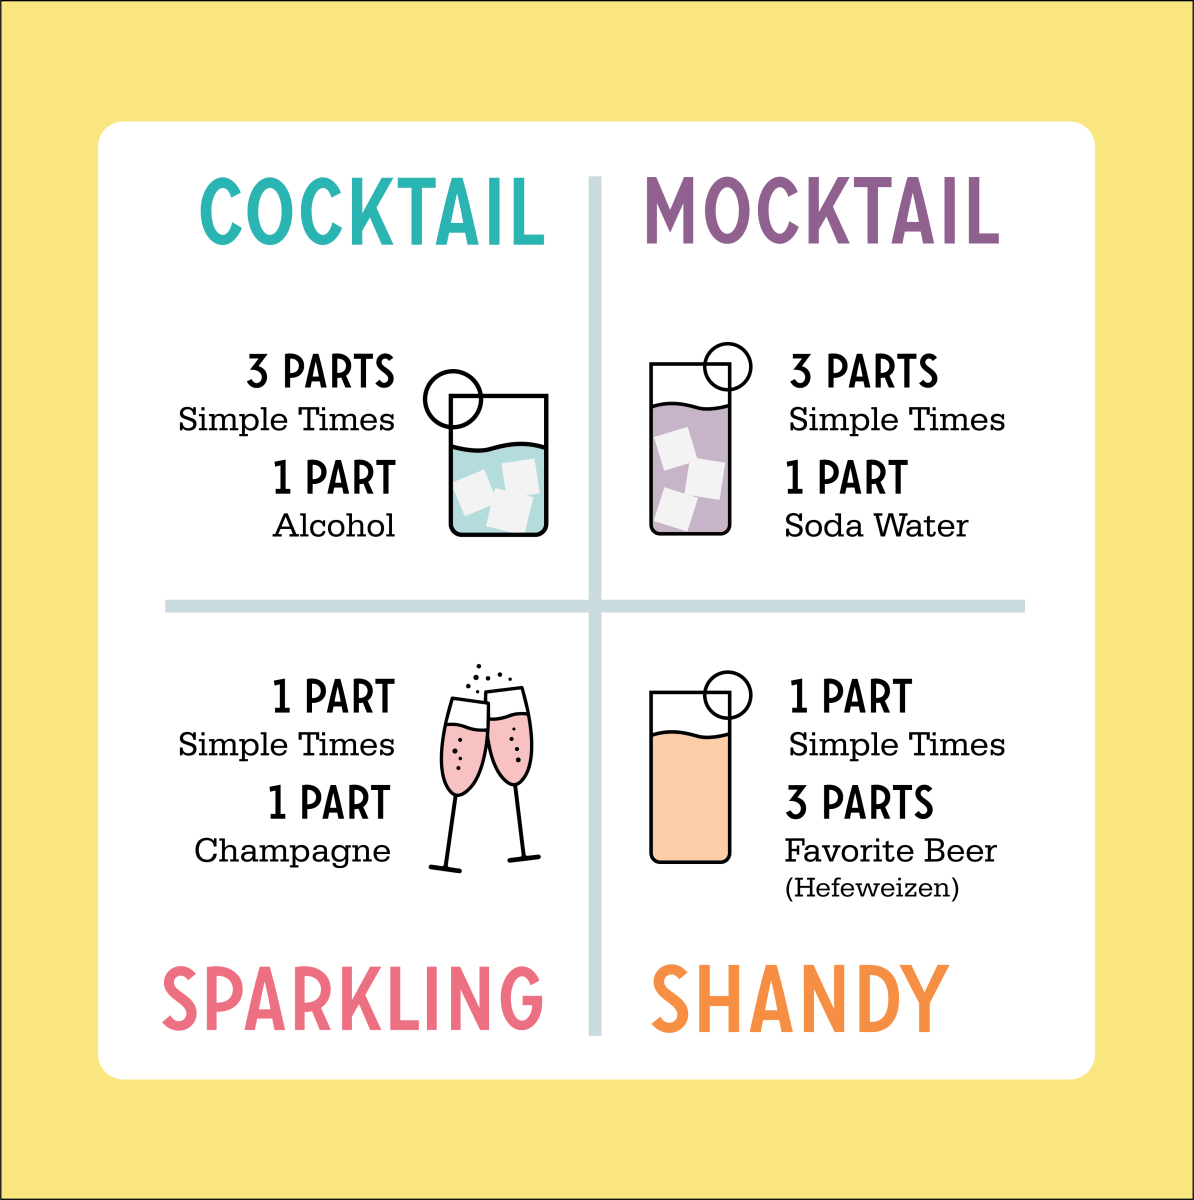 Cocktail Mixers - Alcohol Mixers - Simple Times Mixers - Blackberry Smash